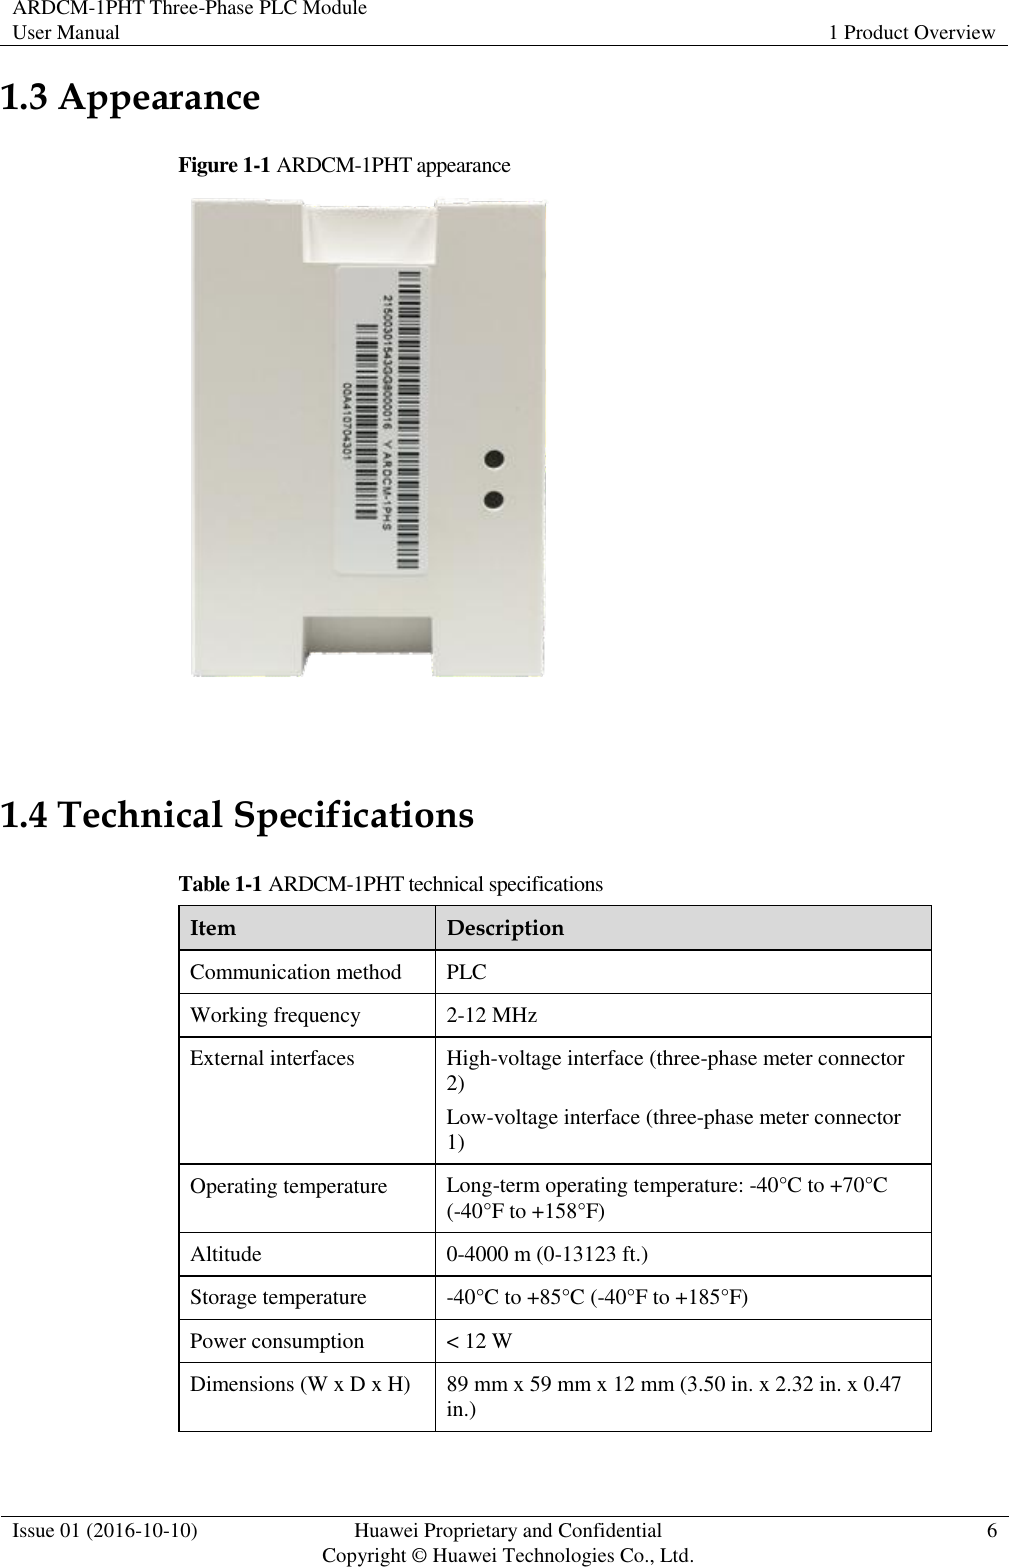 ARDCM-1PHT Three-Phase PLC Module User Manual 1 Product Overview  Issue 01 (2016-10-10) Huawei Proprietary and Confidential Copyright © Huawei Technologies Co., Ltd. 6  1.3 Appearance Figure 1-1 ARDCM-1PHT appearance   1.4 Technical Specifications Table 1-1 ARDCM-1PHT technical specifications Item Description Communication method PLC Working frequency 2-12 MHz External interfaces High-voltage interface (three-phase meter connector 2) Low-voltage interface (three-phase meter connector 1) Operating temperature Long-term operating temperature: -40°C to +70°C (-40°F to +158°F) Altitude 0-4000 m (0-13123 ft.) Storage temperature -40°C  to +85°C  (-40°F to +185°F ) Power consumption &lt; 12 W Dimensions (W x D x H) 89 mm x 59 mm x 12 mm (3.50 in. x 2.32 in. x 0.47 in.) 